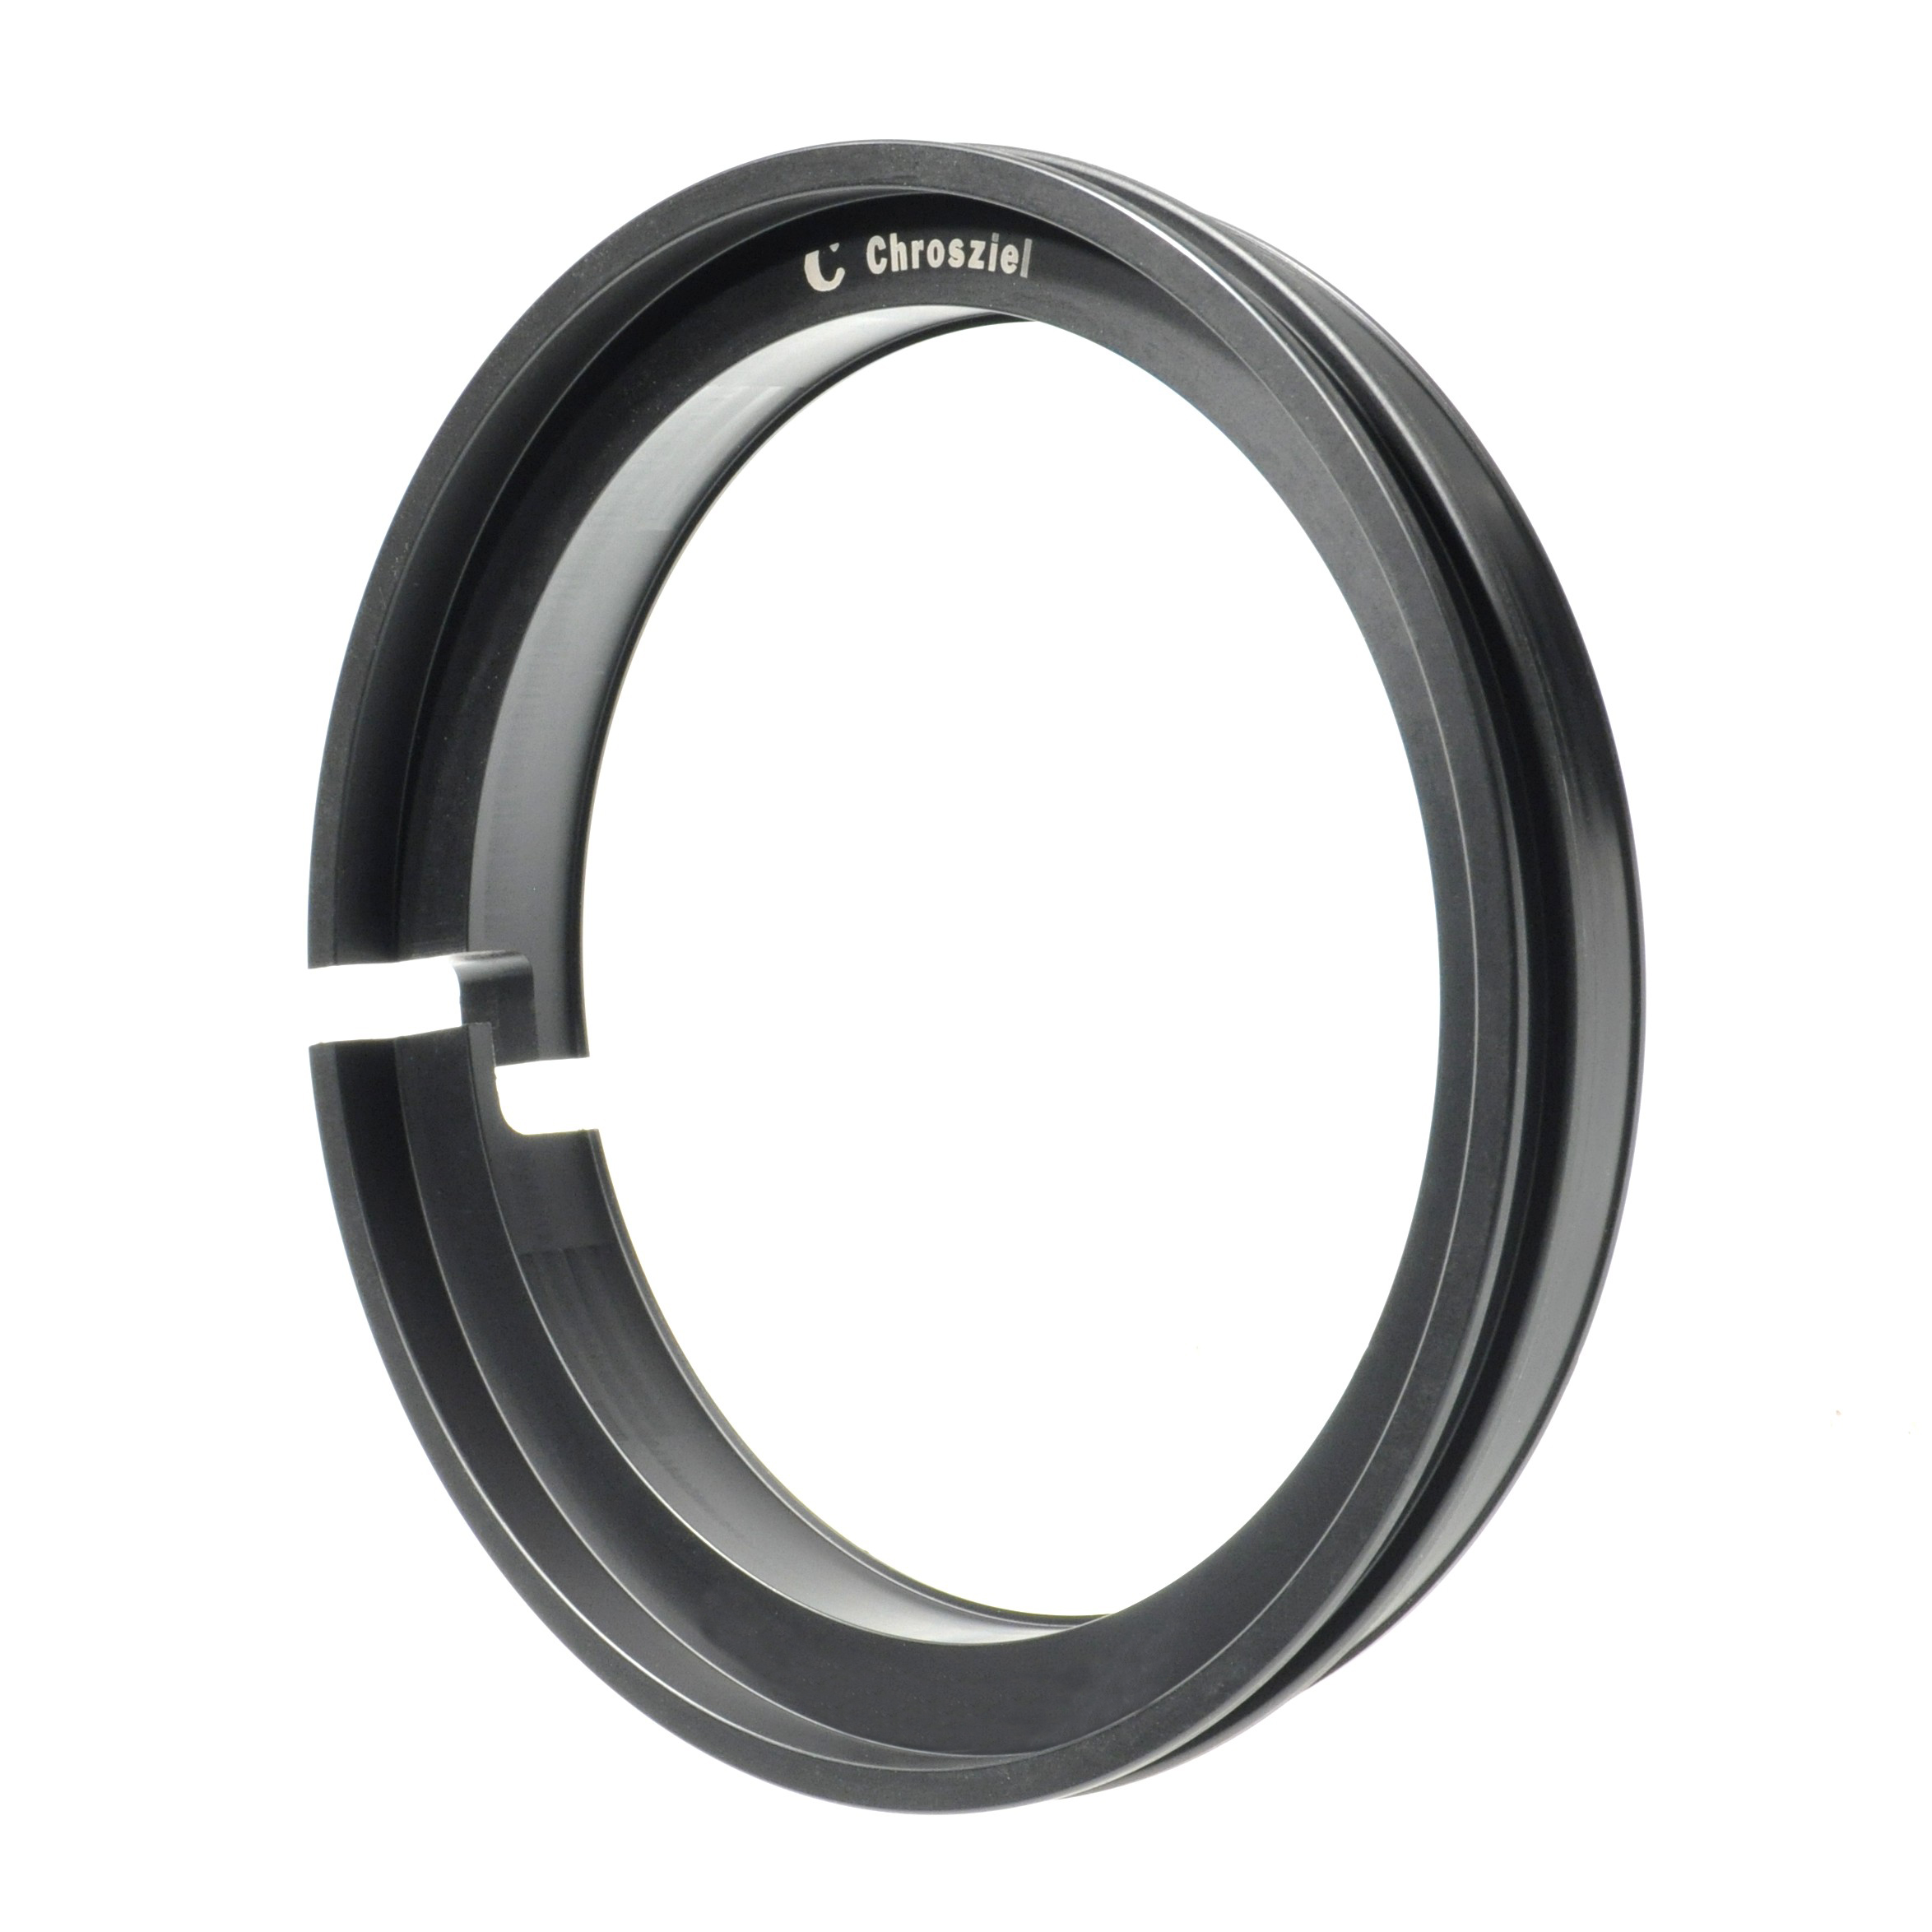 Step-down Ring Ø 130:105mm for MB456 and MB450